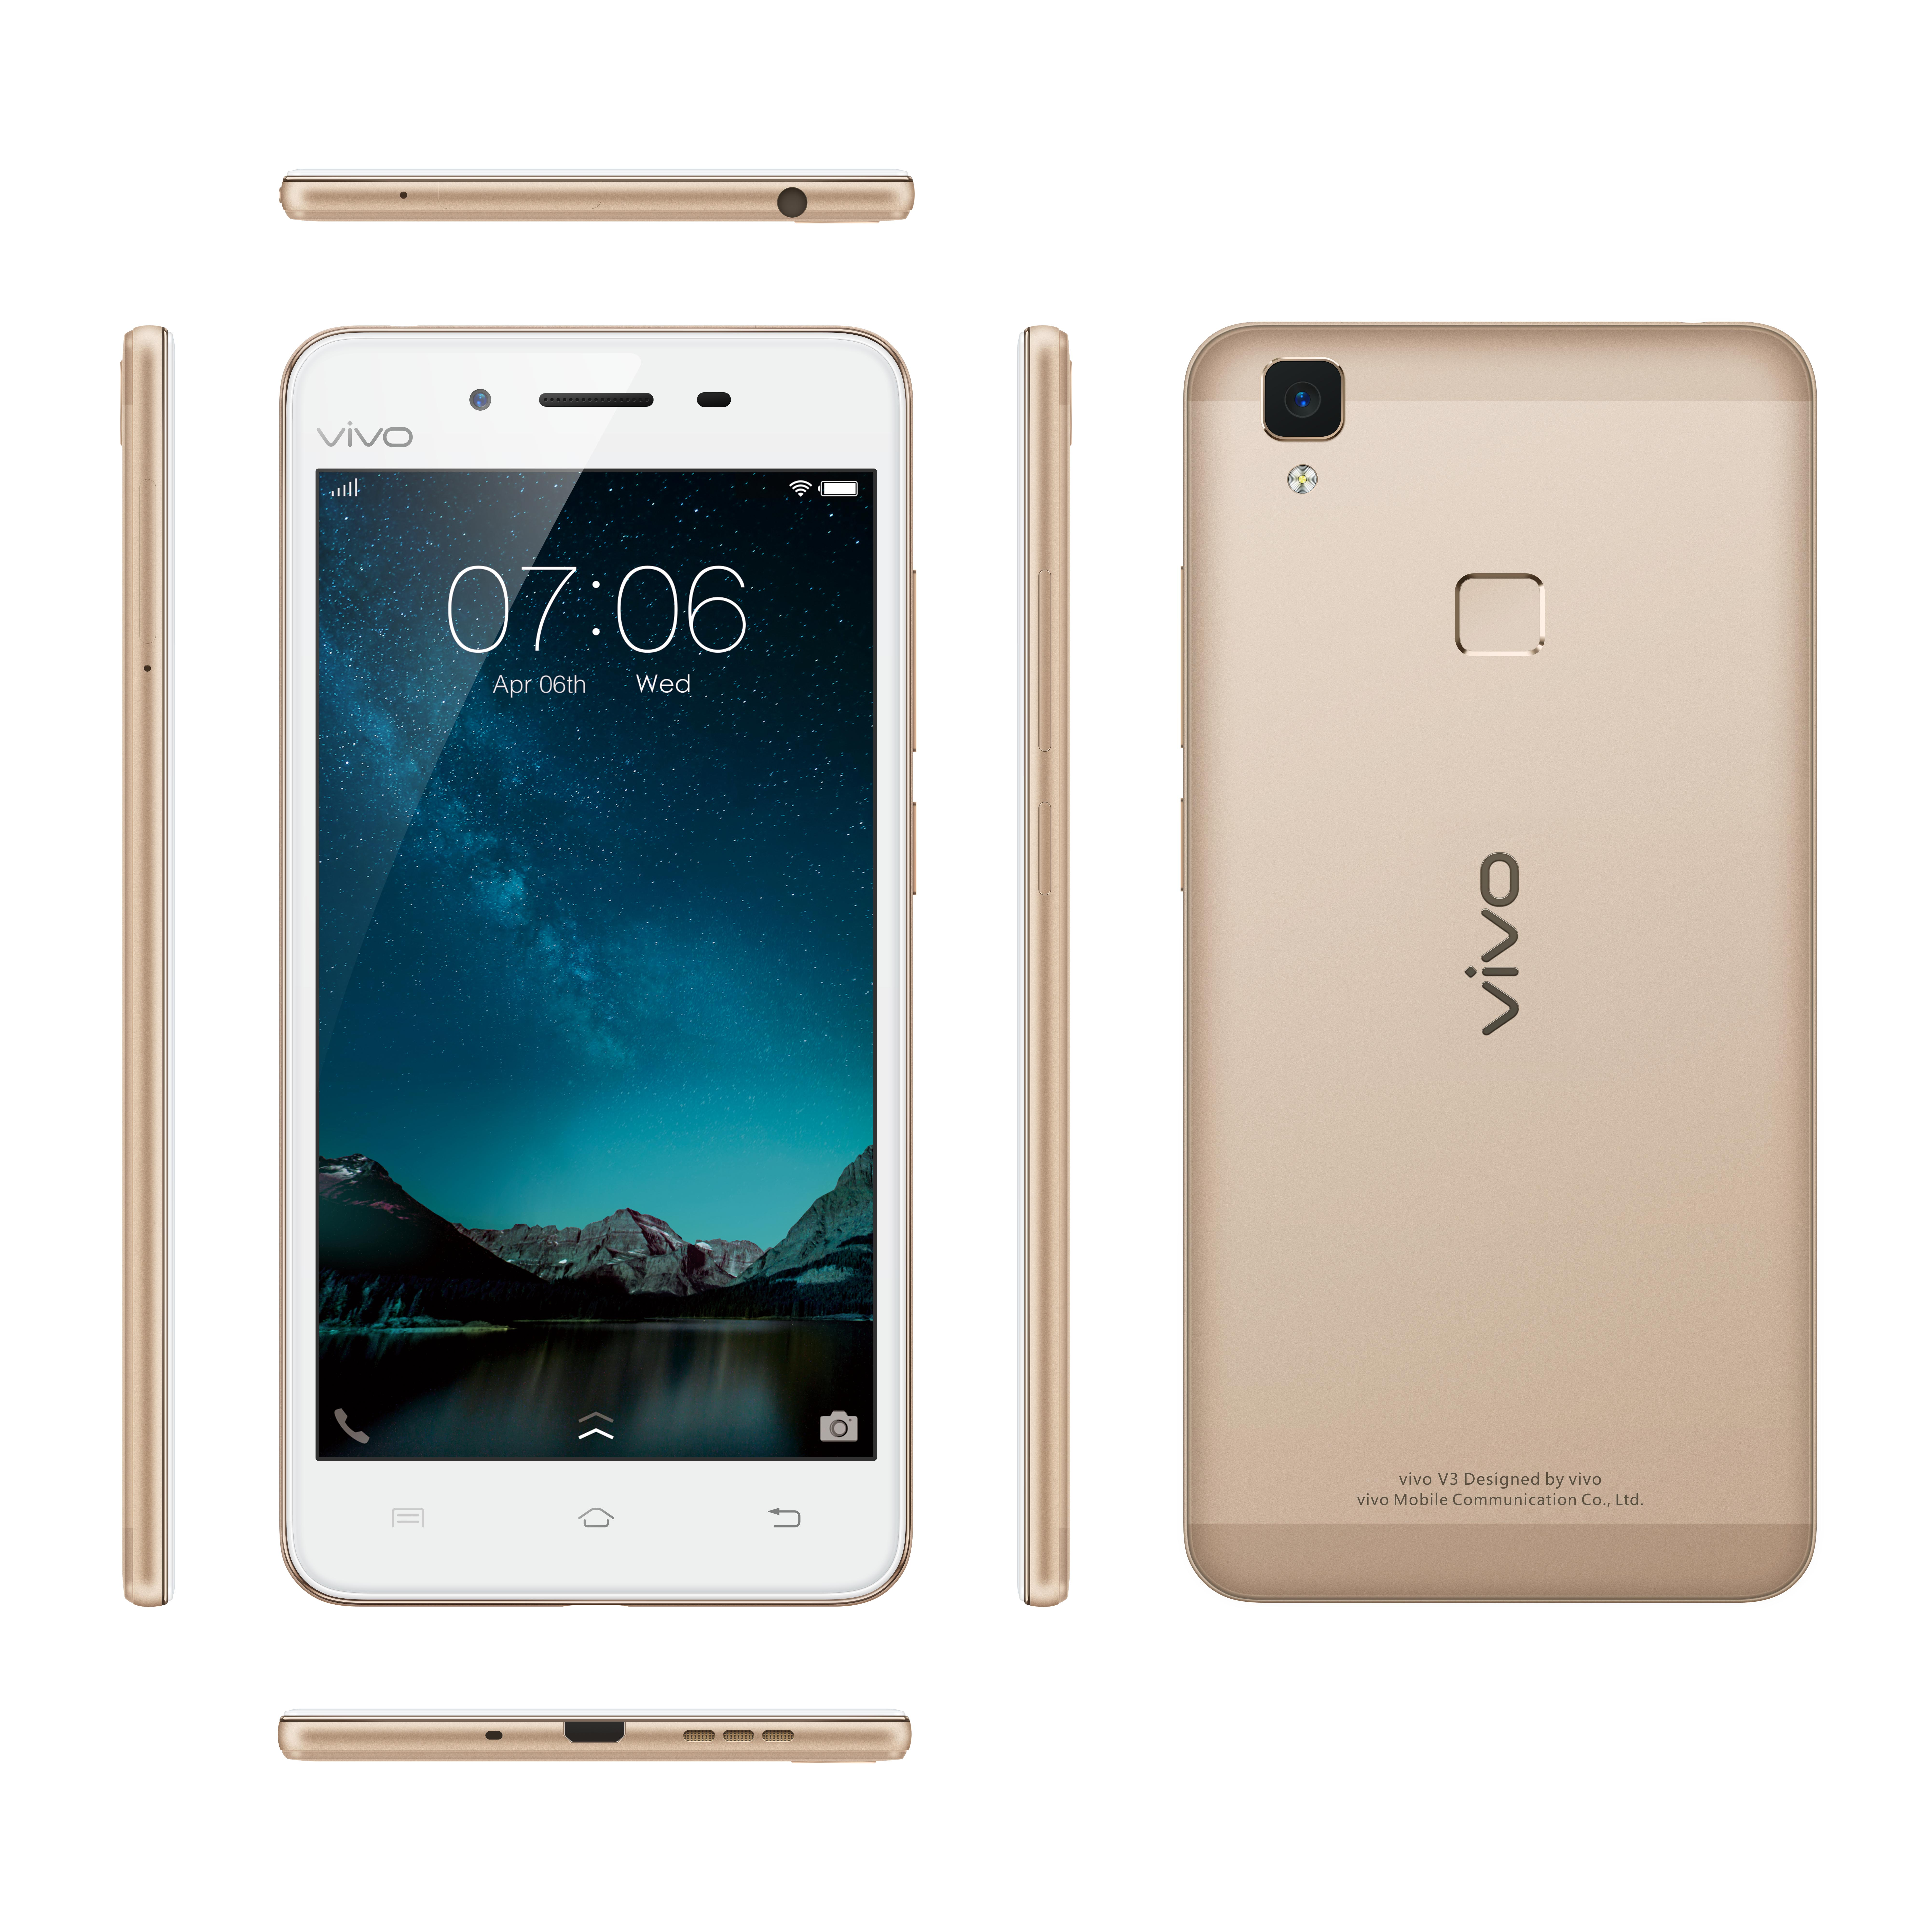 VIVO V3 With voLTE Now Priced At Rs.14,980 Only